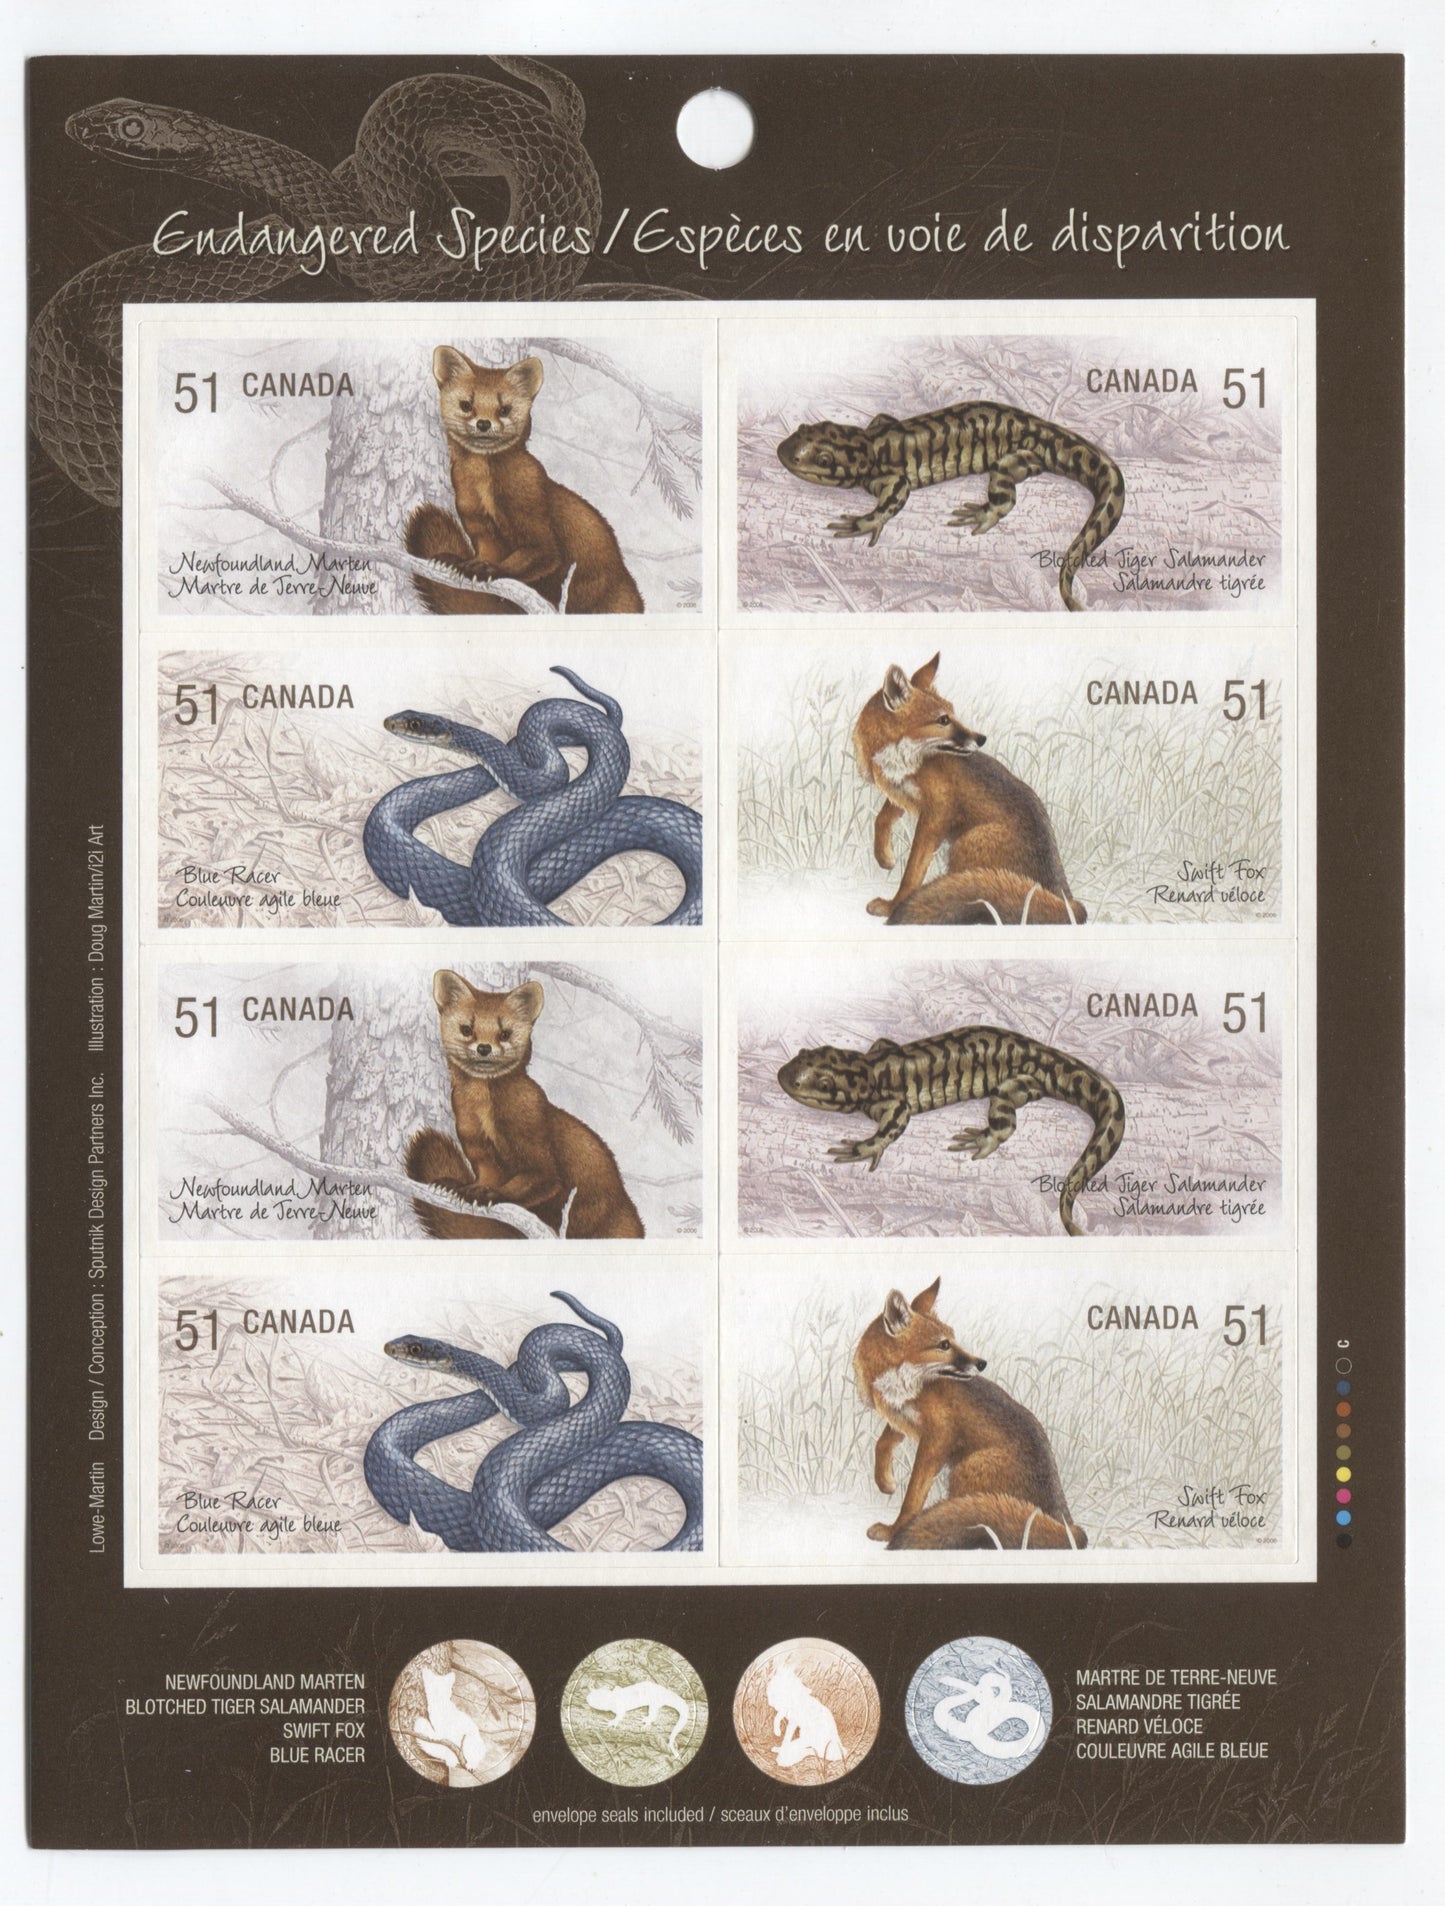 Canada #BK335 2006 Endangered Species Issue, Complete $4.08 Booklet, Tullis Russell Coatings Paper, Dead Paper, 4 mm GT-4 Tagging